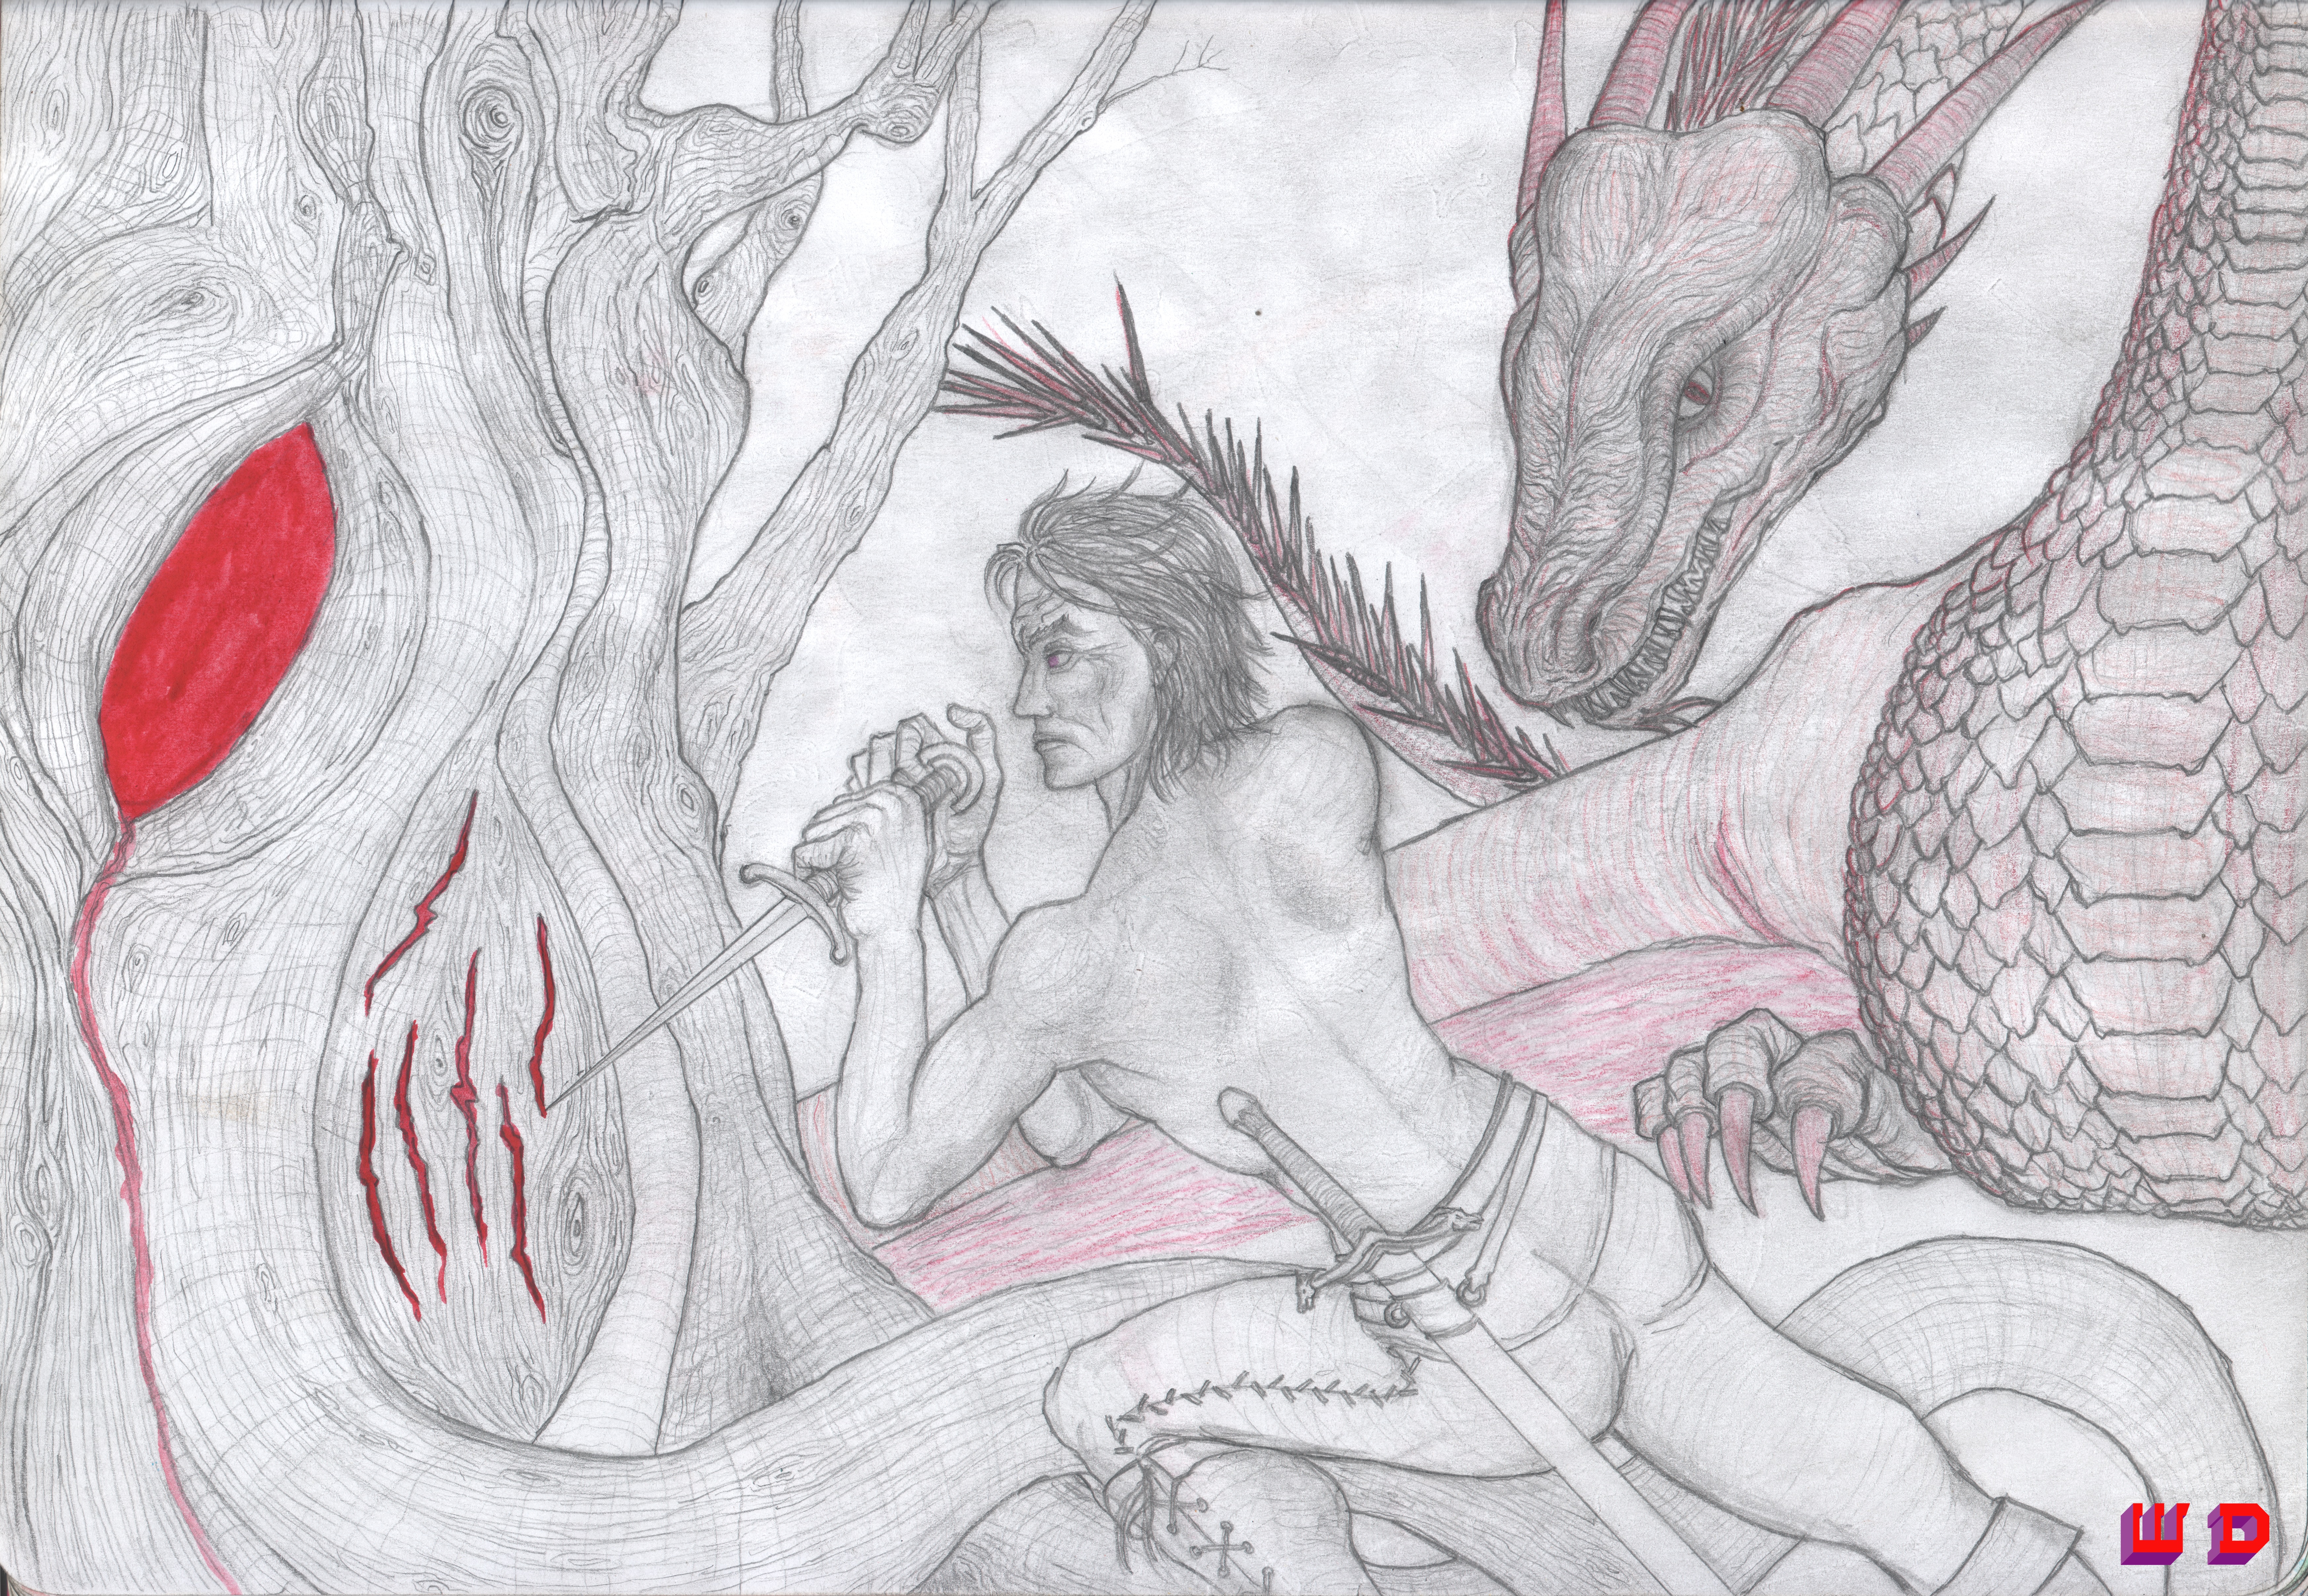 Daemon Targaryen and his Dragon Caraxes in front of the Heart Tree in Harrenhal